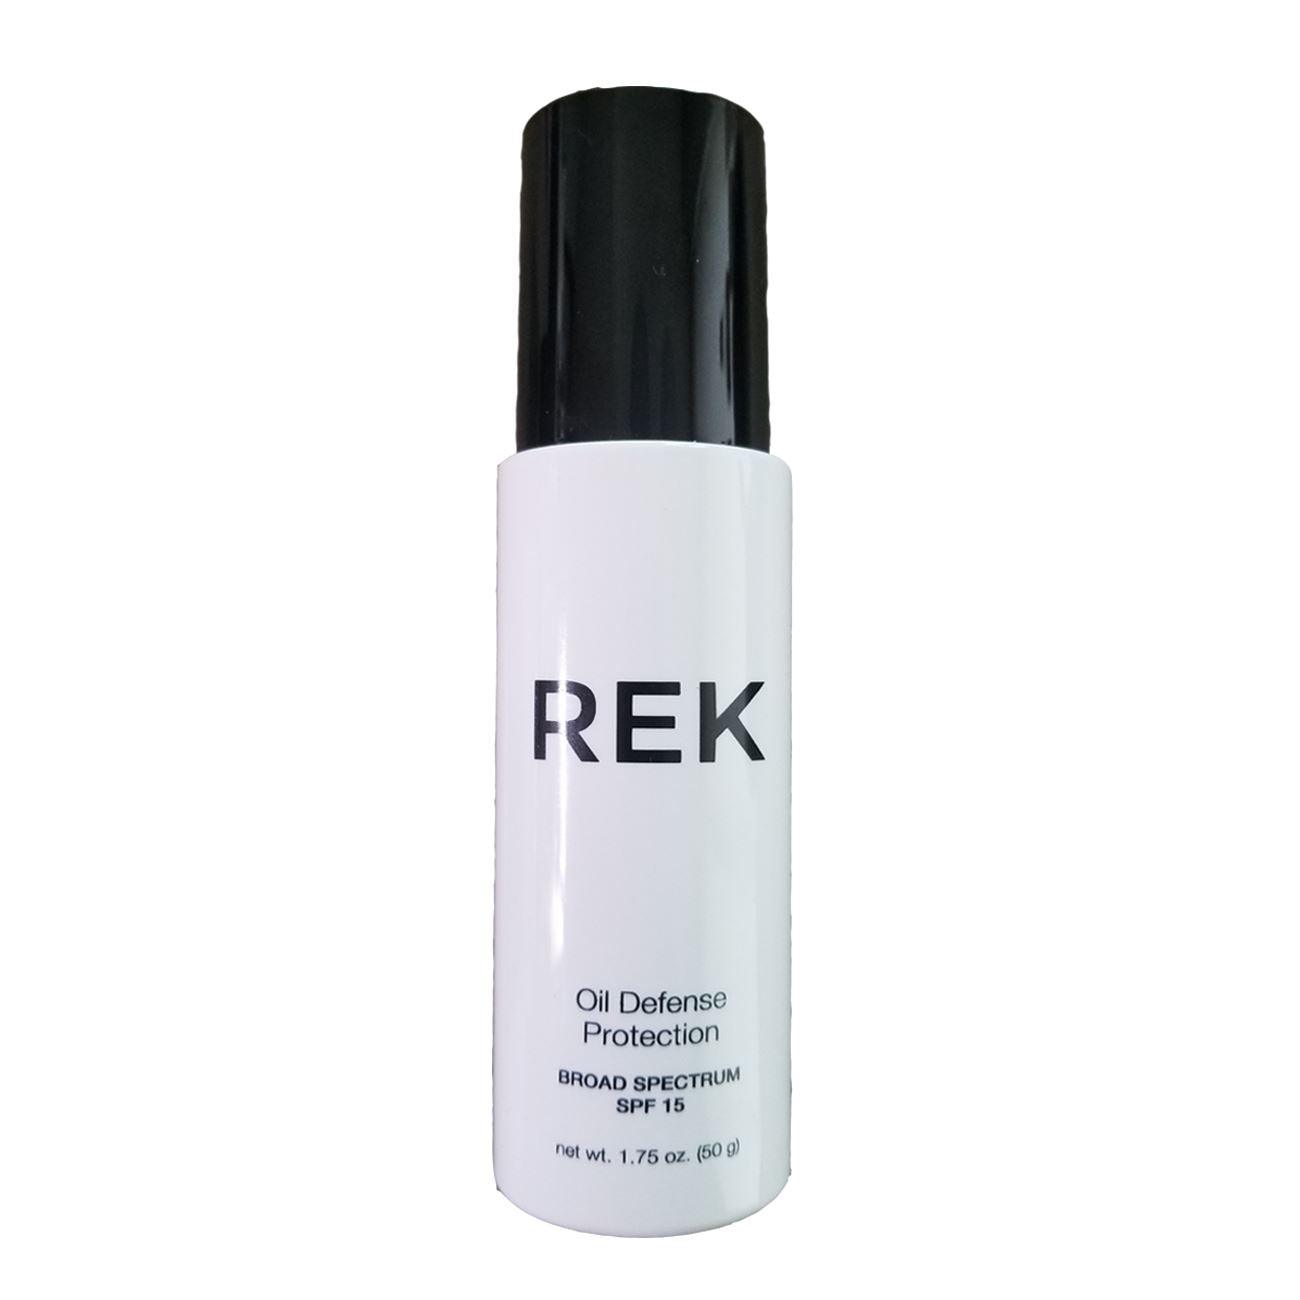 Oil Defense Protection | Limited Edition | REK Cosmetics by REK Cosmetics - Vysn